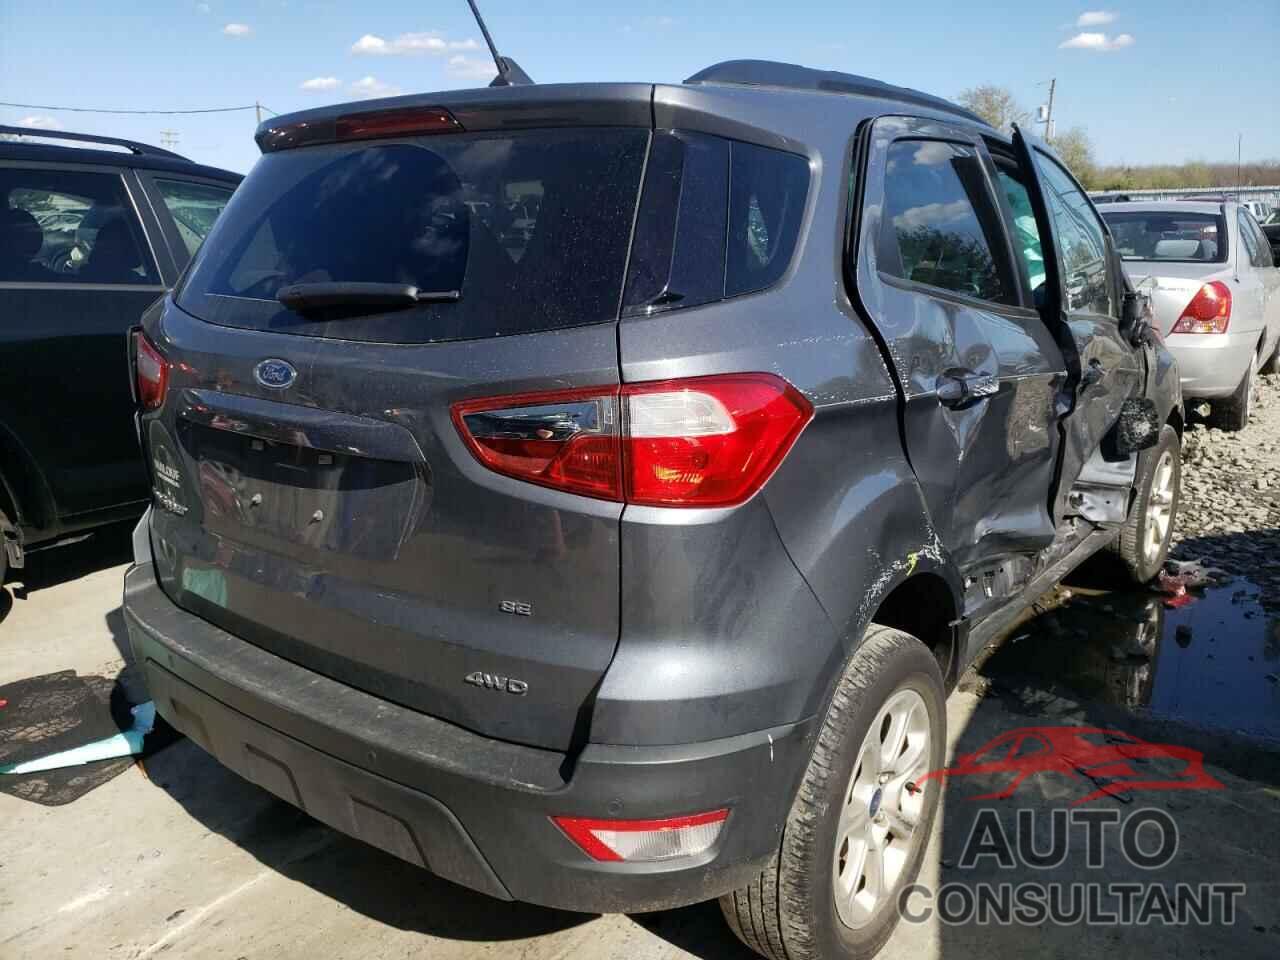 FORD ALL OTHER 2019 - MAJ6S3GL3KC296855